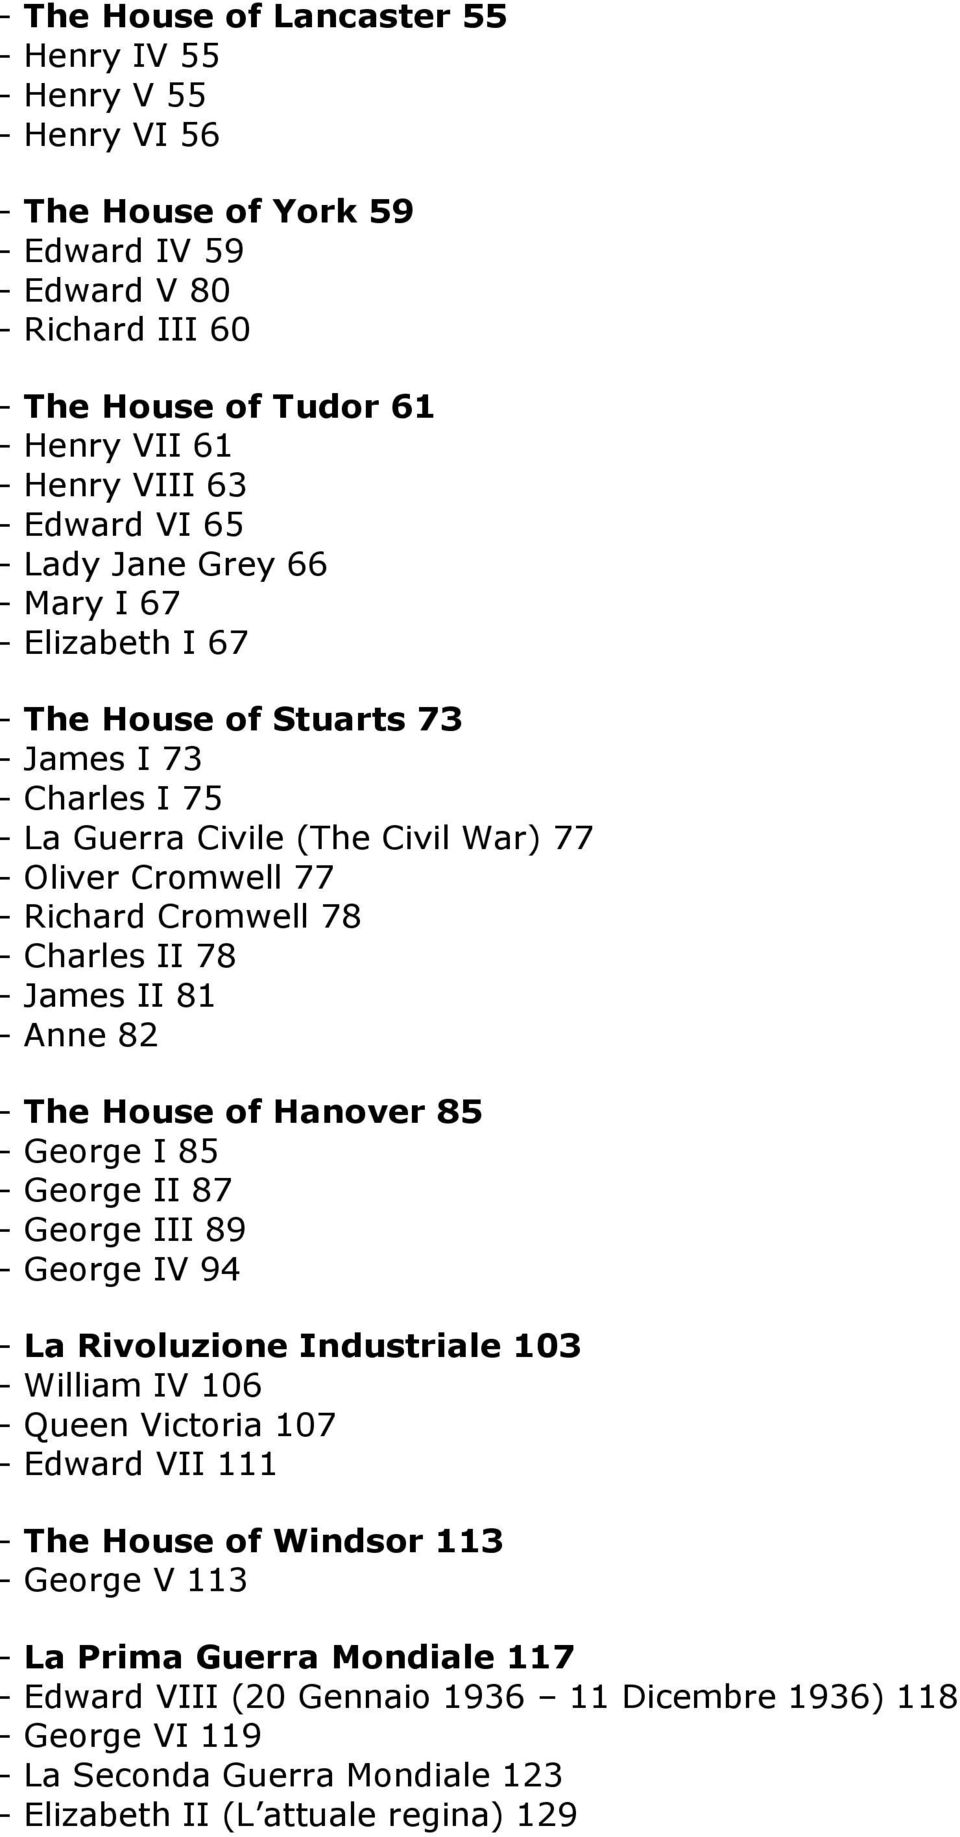 Charles II 78 - James II 81 - Anne 82 - The House of Hanover 85 - George I 85 - George II 87 - George III 89 - George IV 94 - La Rivoluzione Industriale 103 - William IV 106 - Queen Victoria 107 -